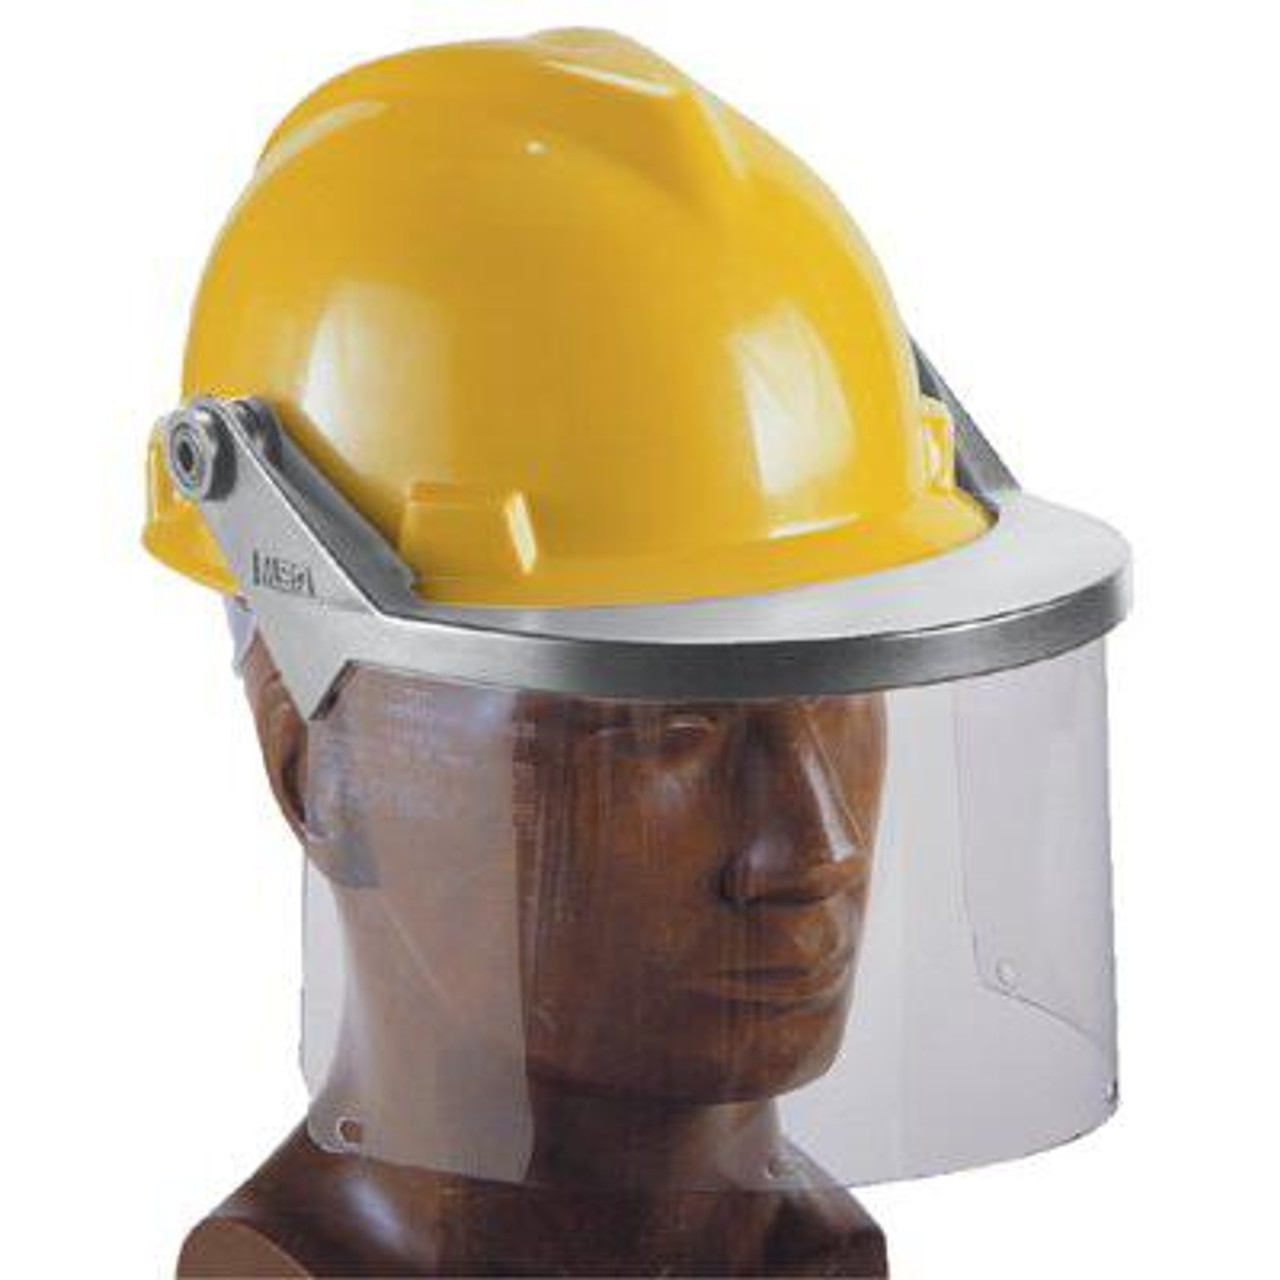 IMPA 310501 CLEAR VISOR WITH EAR CUP KIT FOR ATTACHMENT TO HELMET